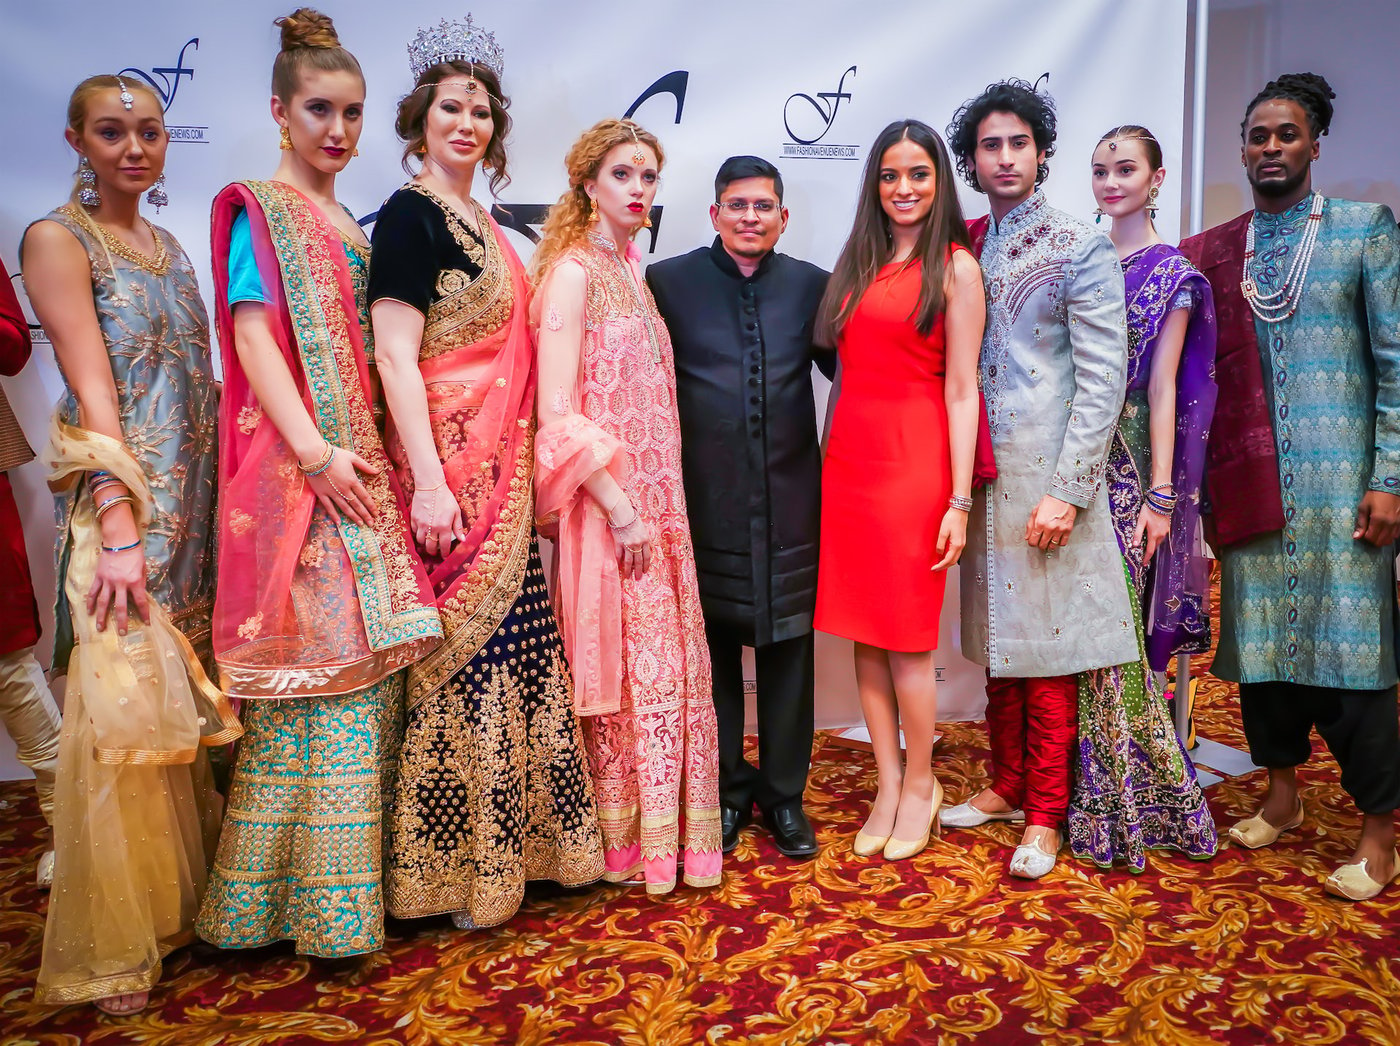 Prashant Goyal of Heritage India Fashions celebrates beauty in diversity by featuring models with disabilities at Kiss the Monkeys Celebrity Gala FAO Schwarz Royalton